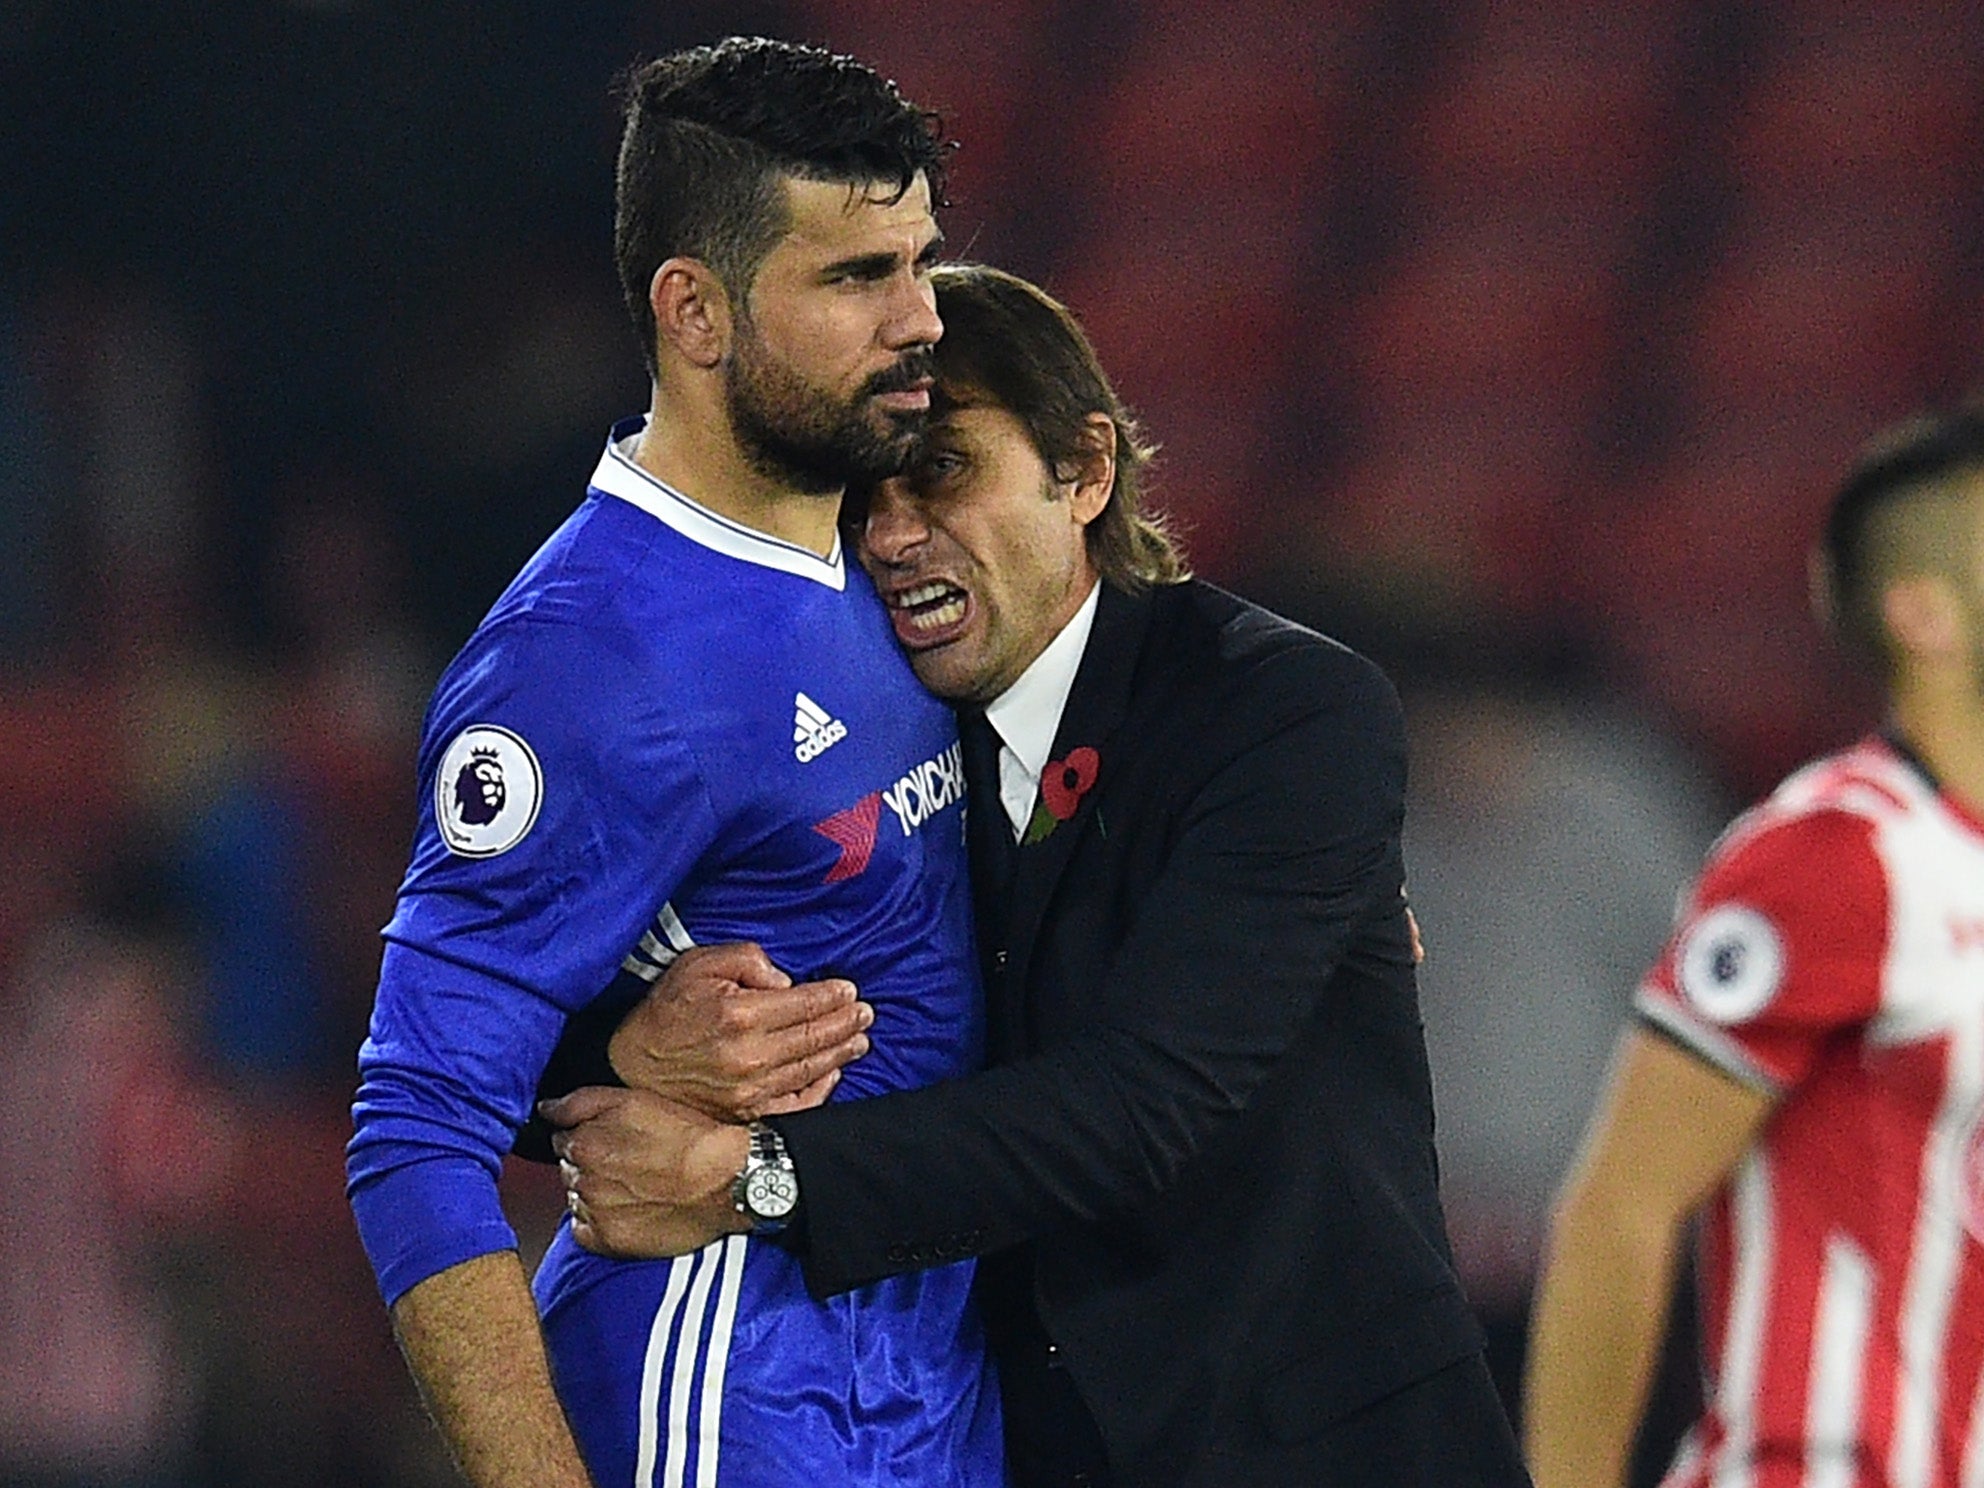 Conte has not decided whether Costa will start yet